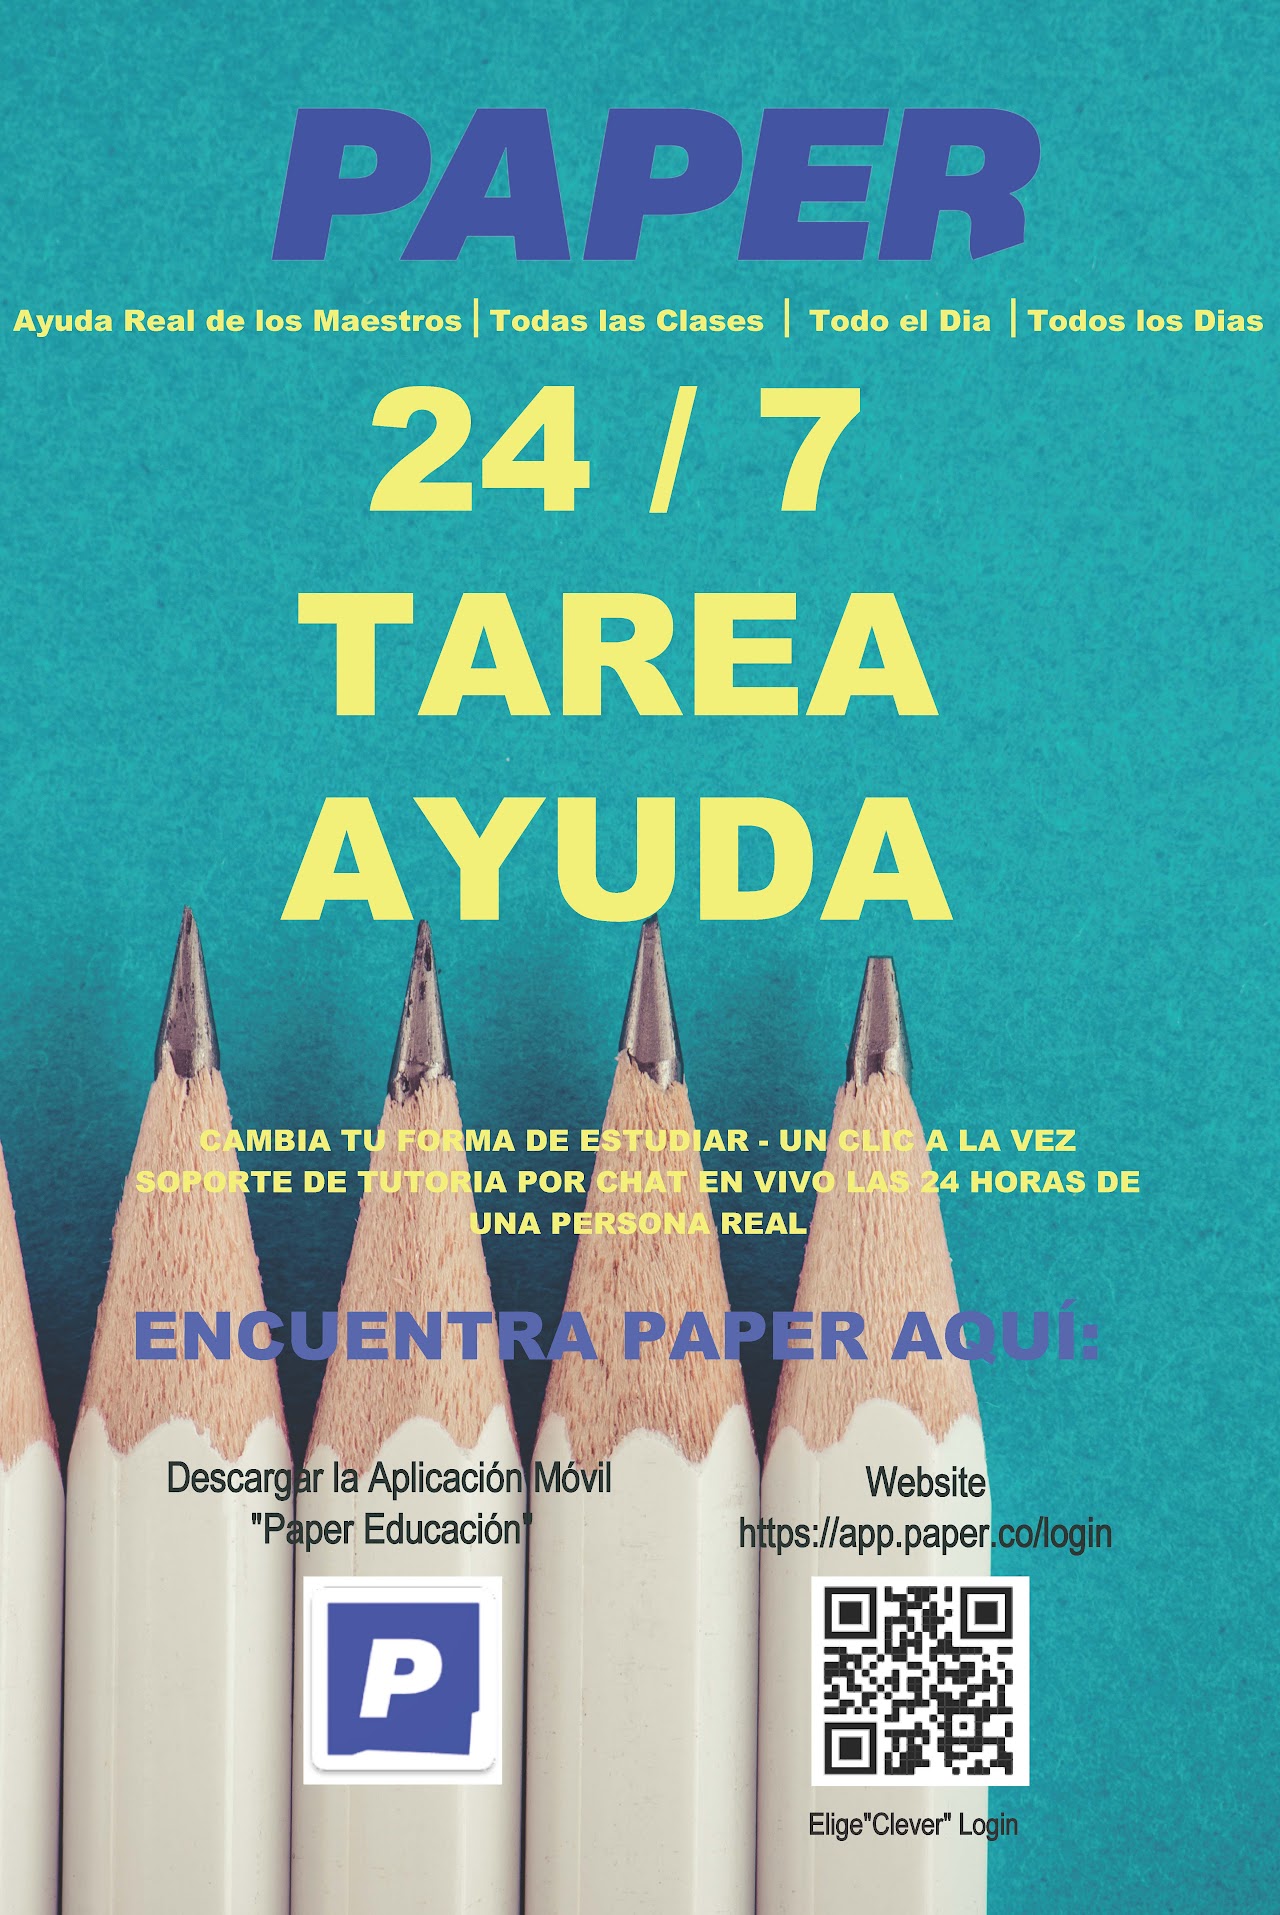 Paper 24/7 Homework Help - Spanish version with a QR Code